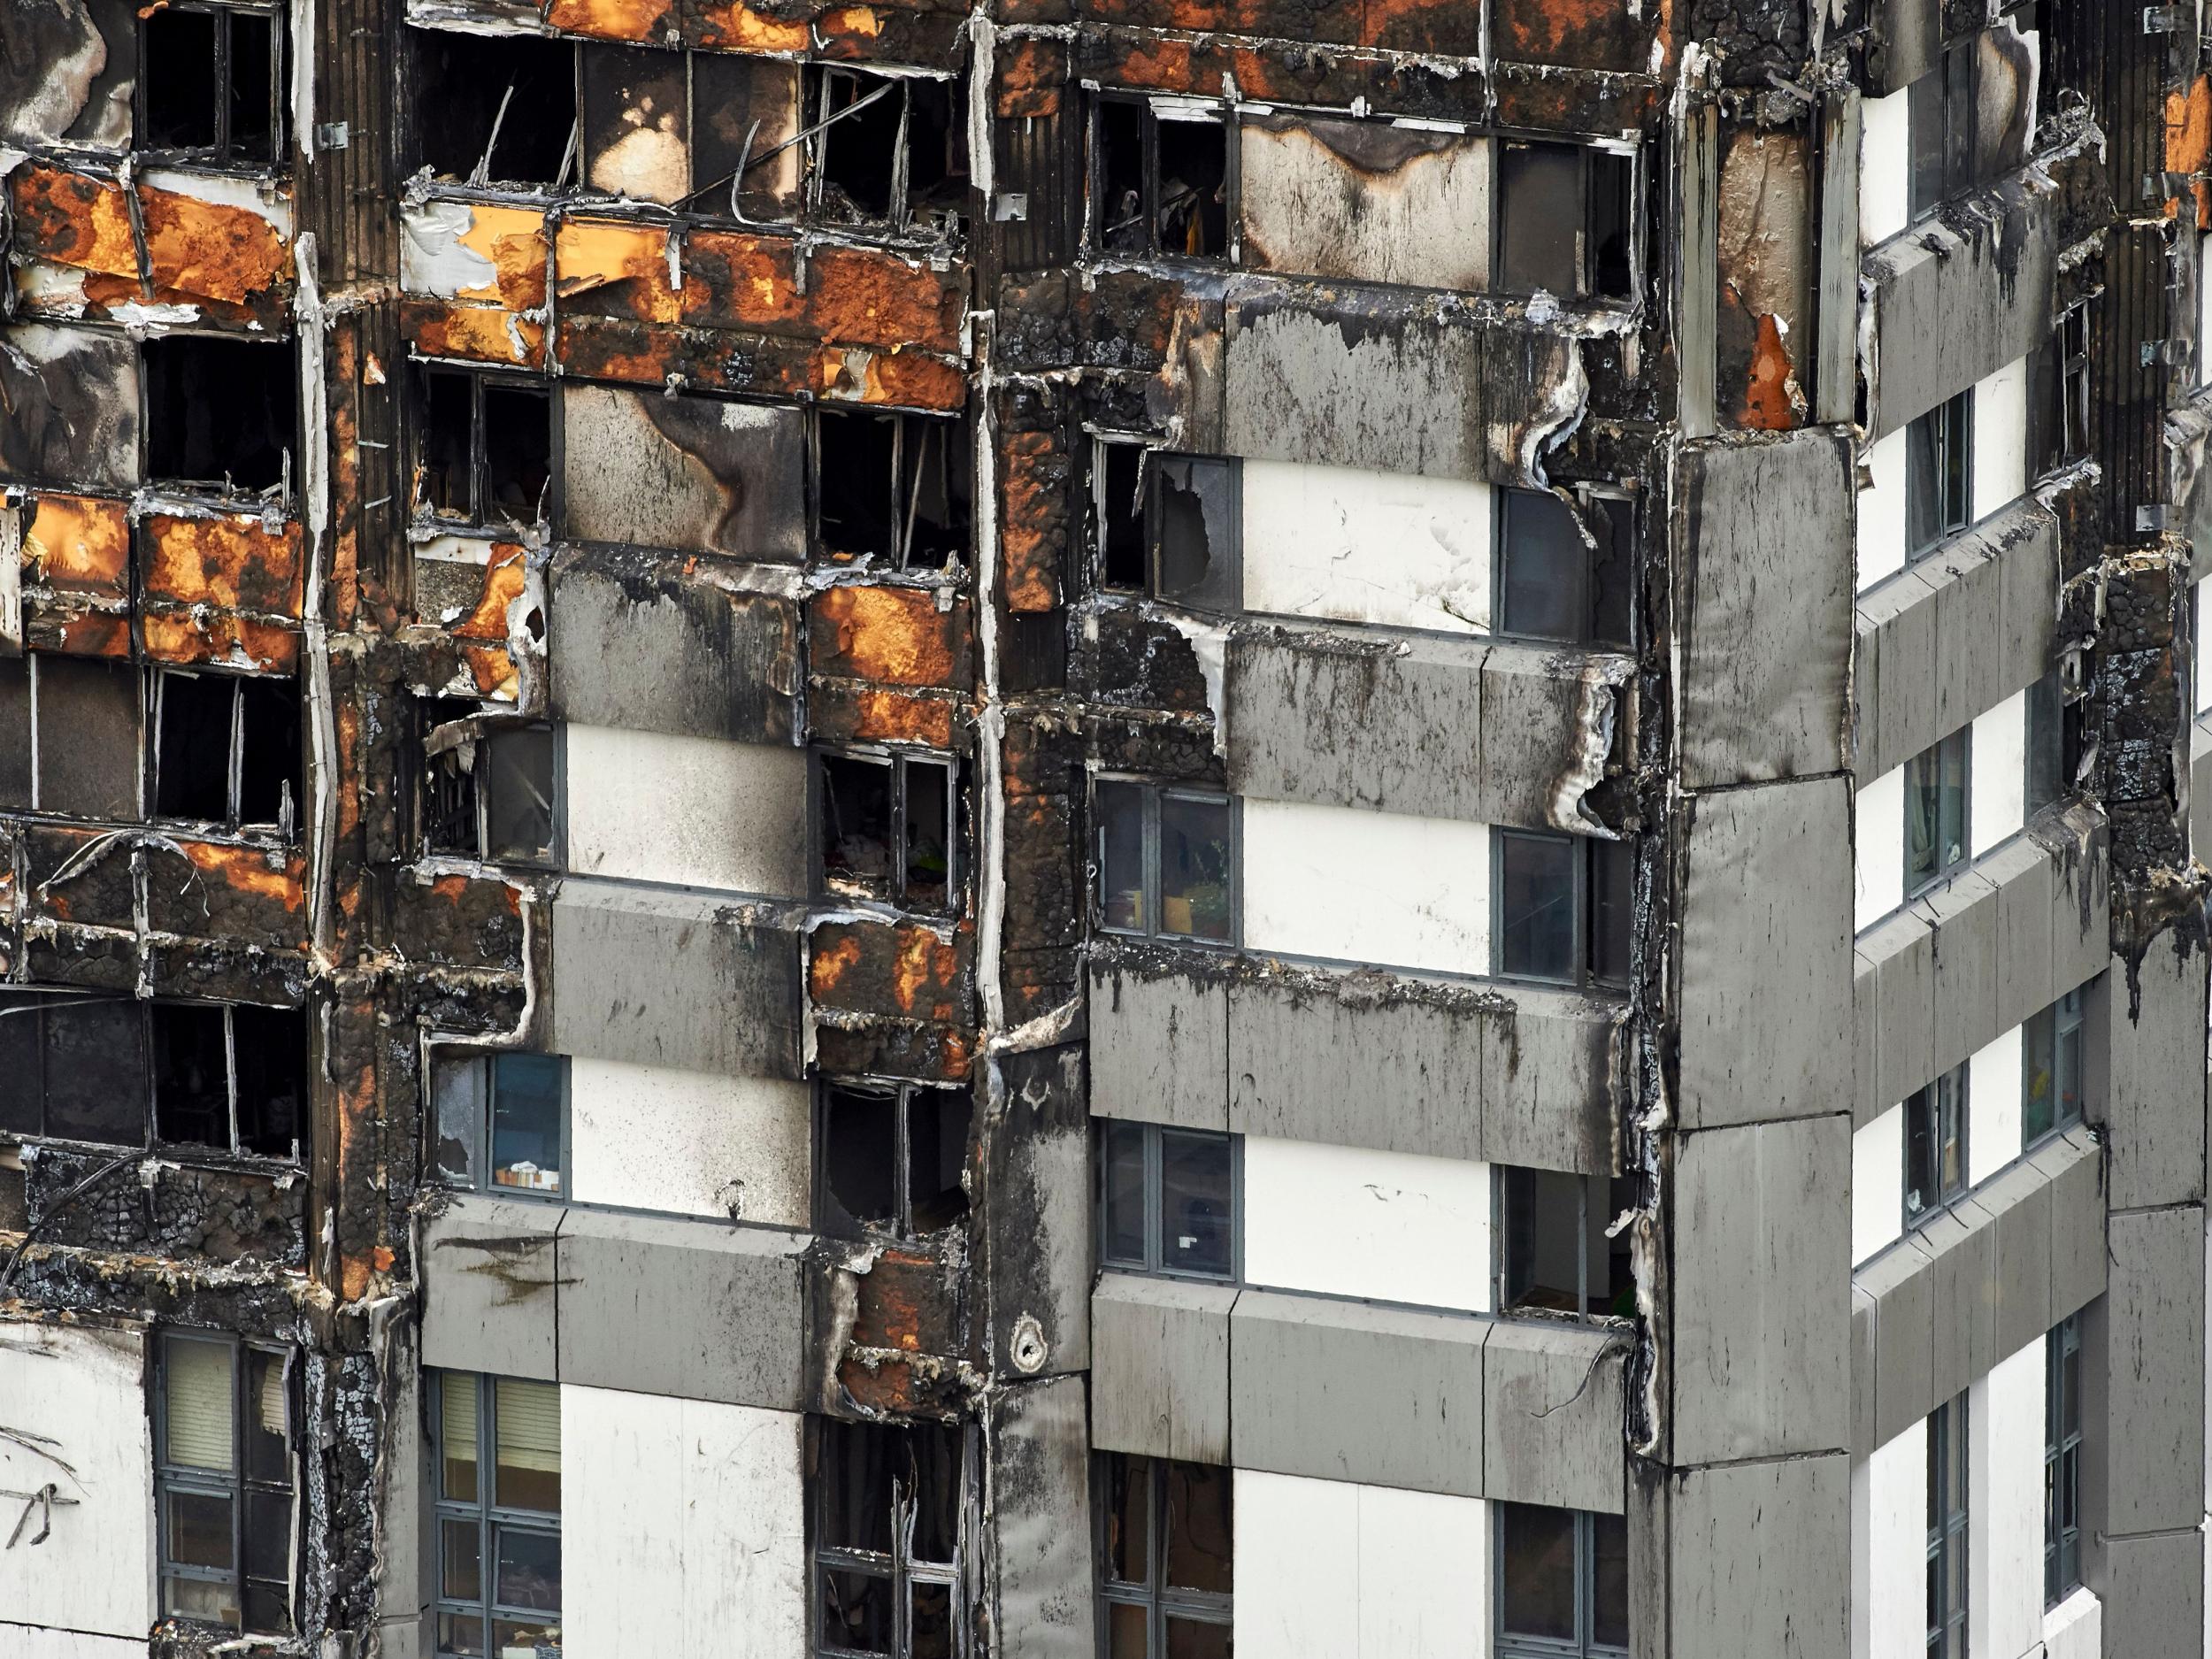 Cladding covering Grenfell Tower would have burned as quickly as petrol, fire safety experts have said